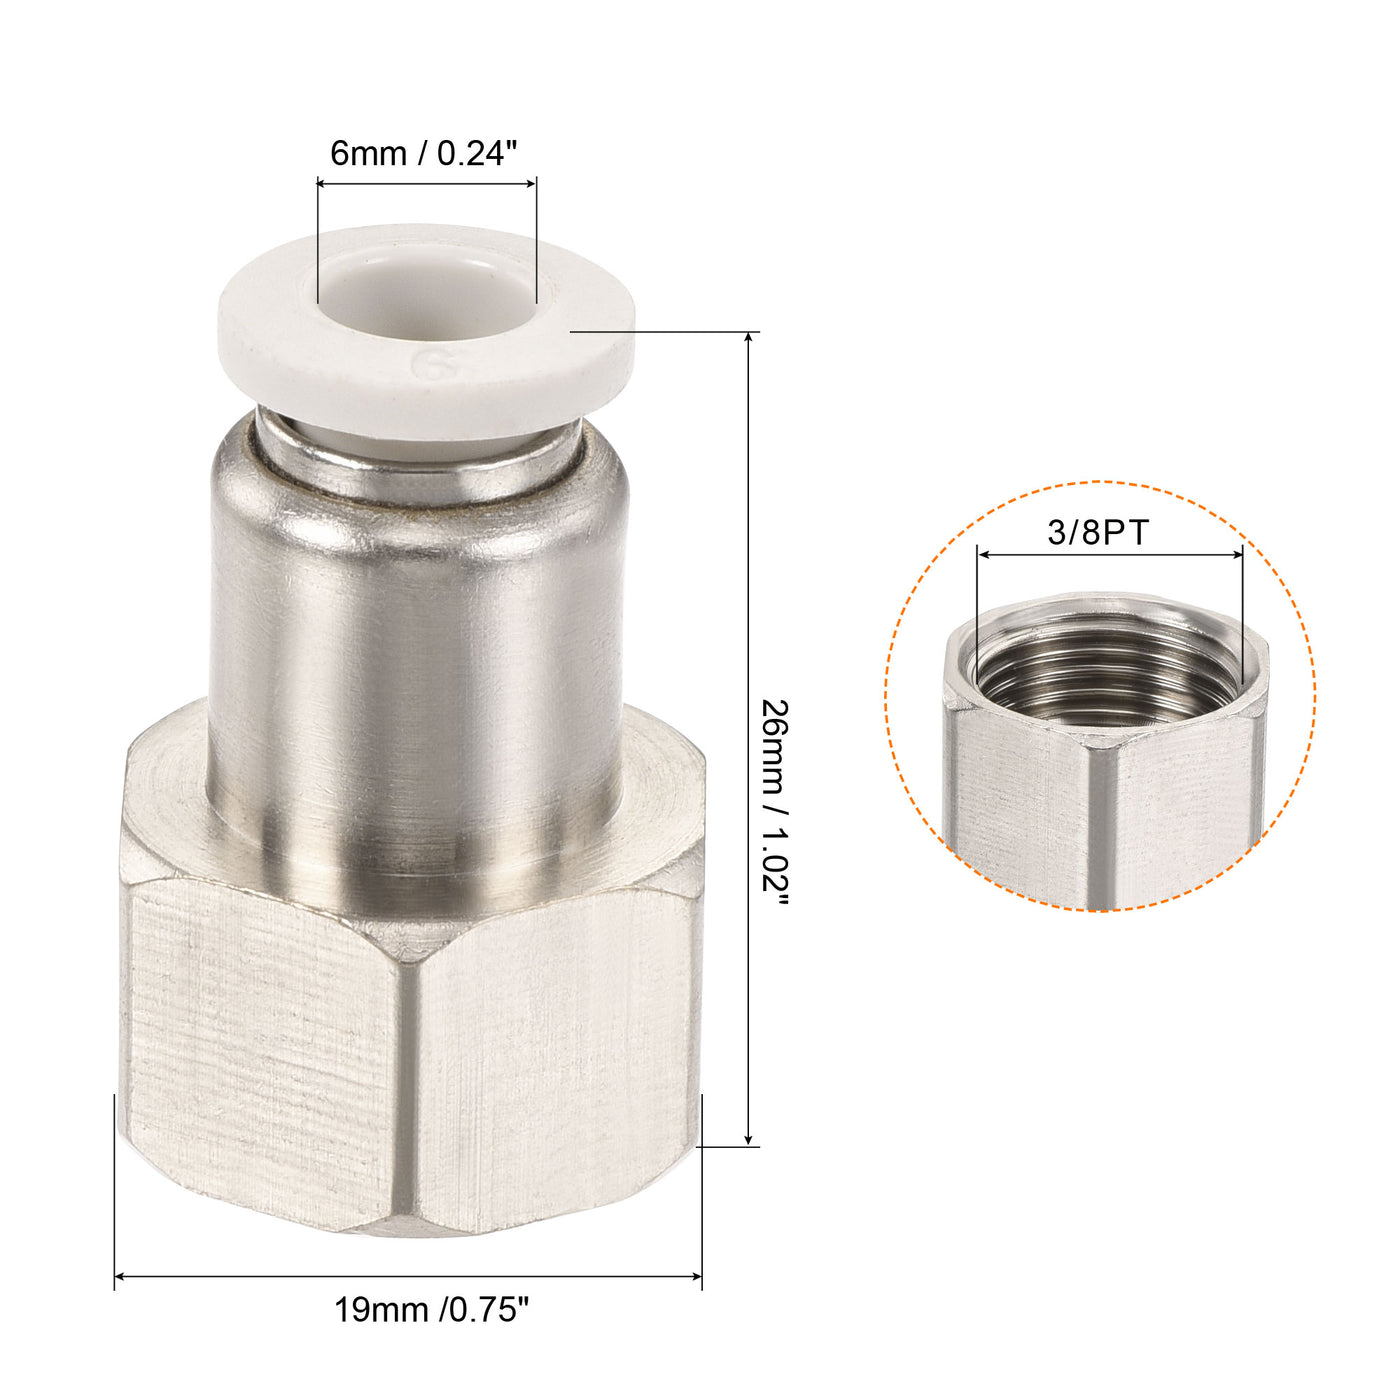 Harfington Push to Connect Fittings 3/8PT Female Thread Fit 6mm Tube OD Nickel-plated Copper Straight Union Fitting, Pack of 3